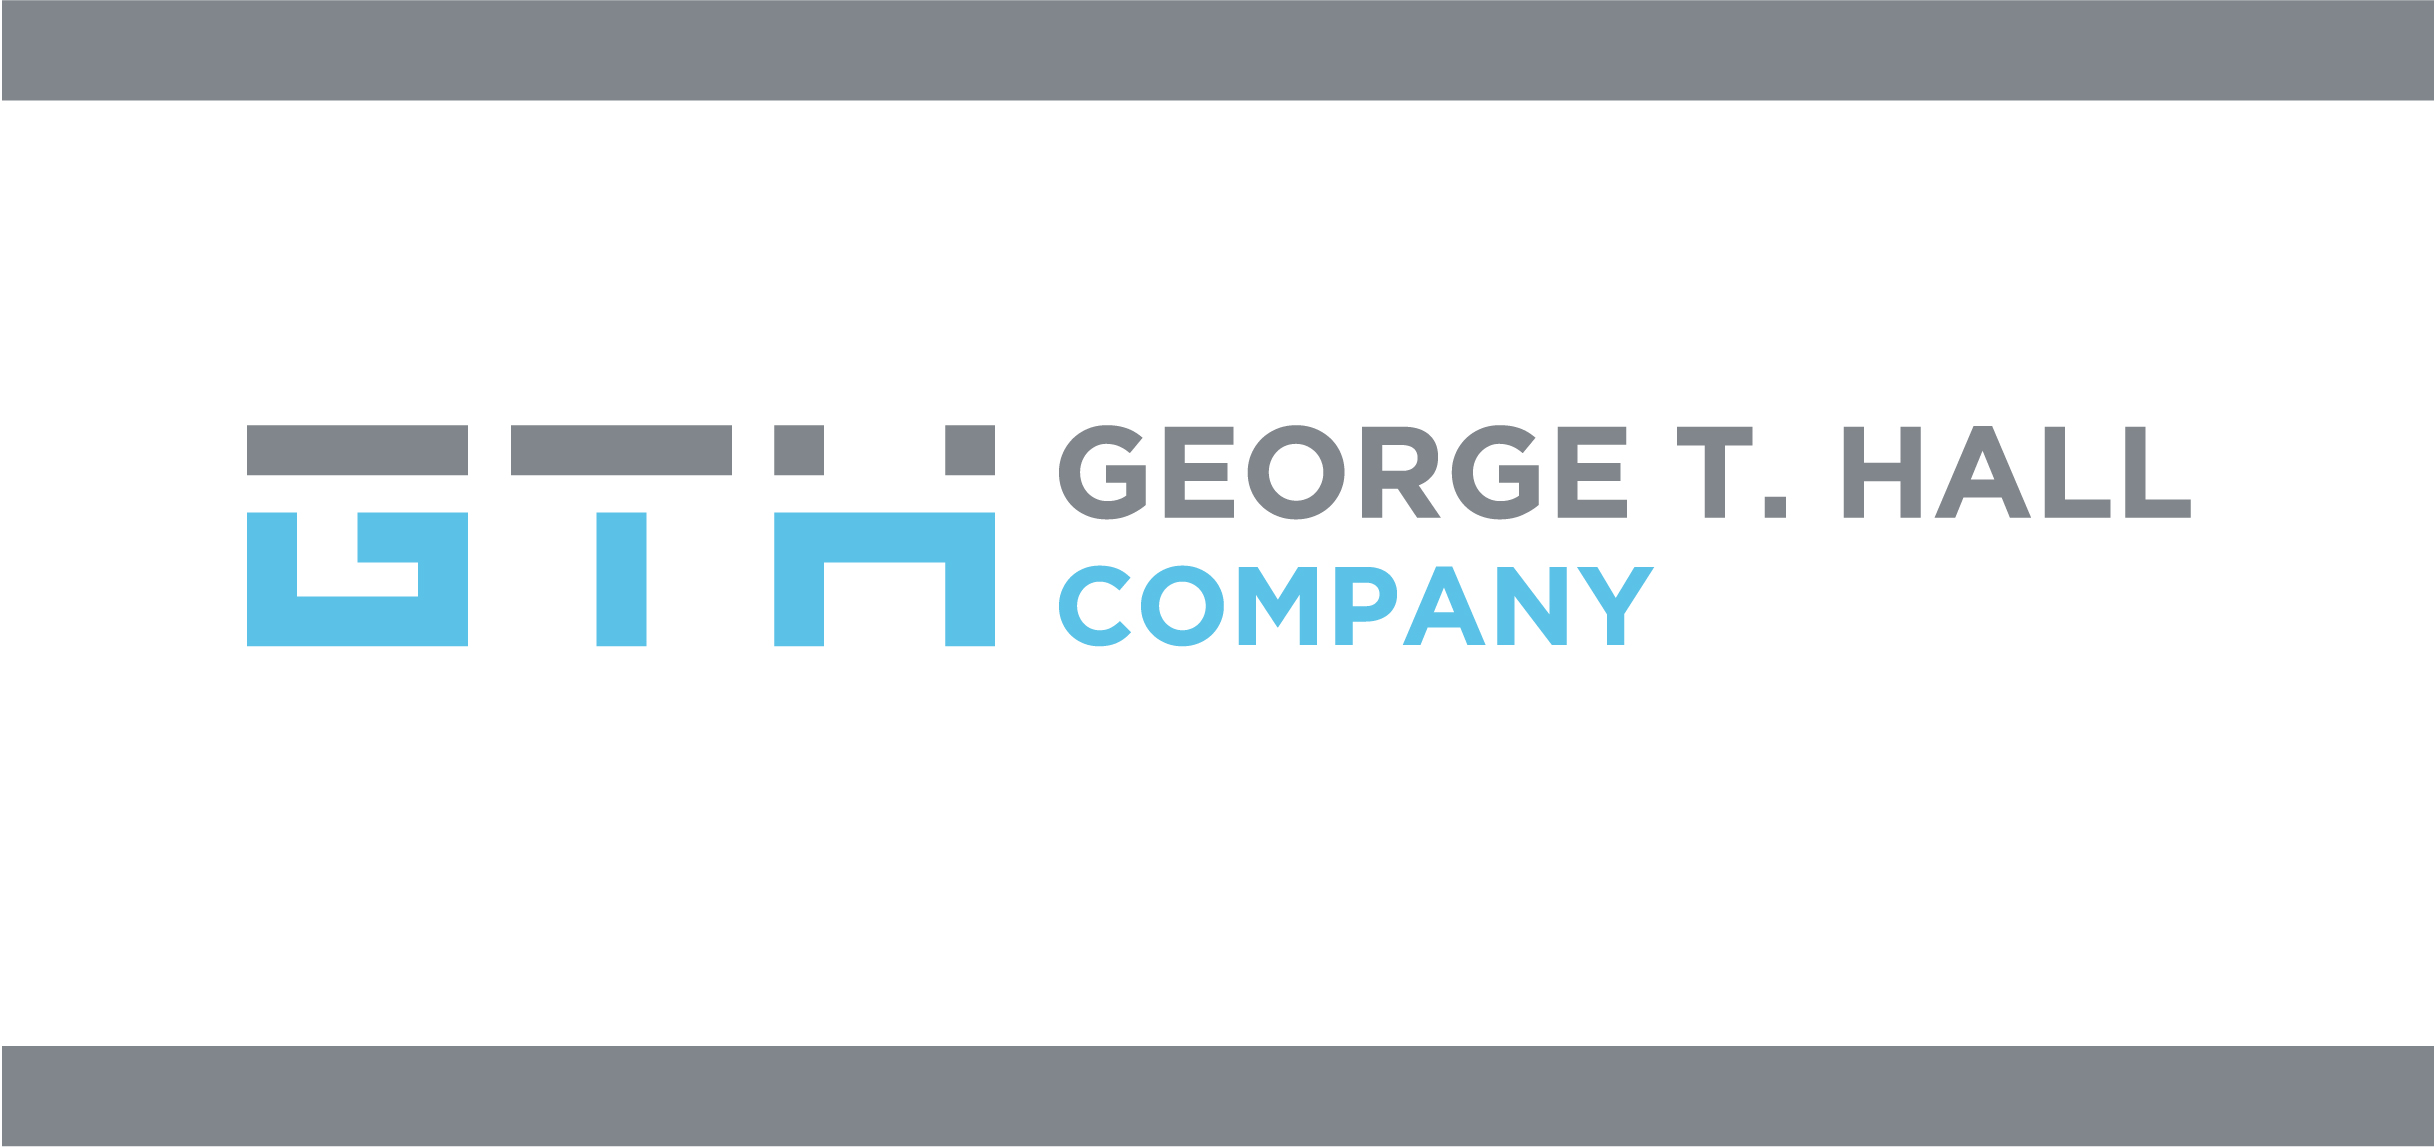 GTH is open to serve our essential business customers